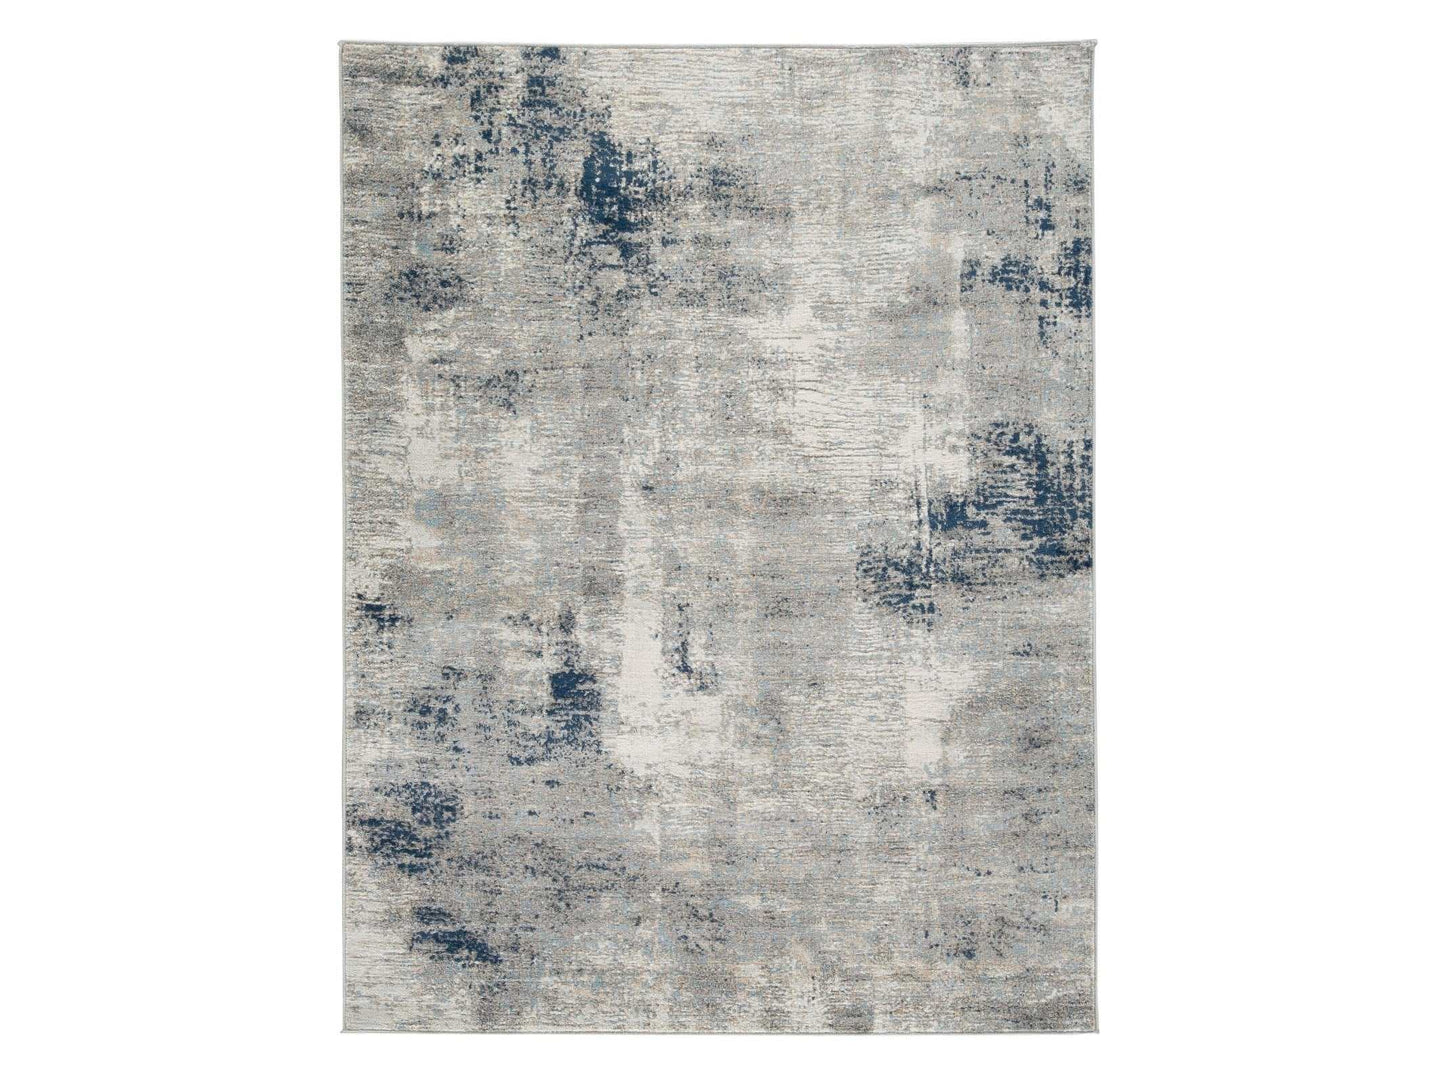 Wrenstow Rug Multi Color 5 x 7